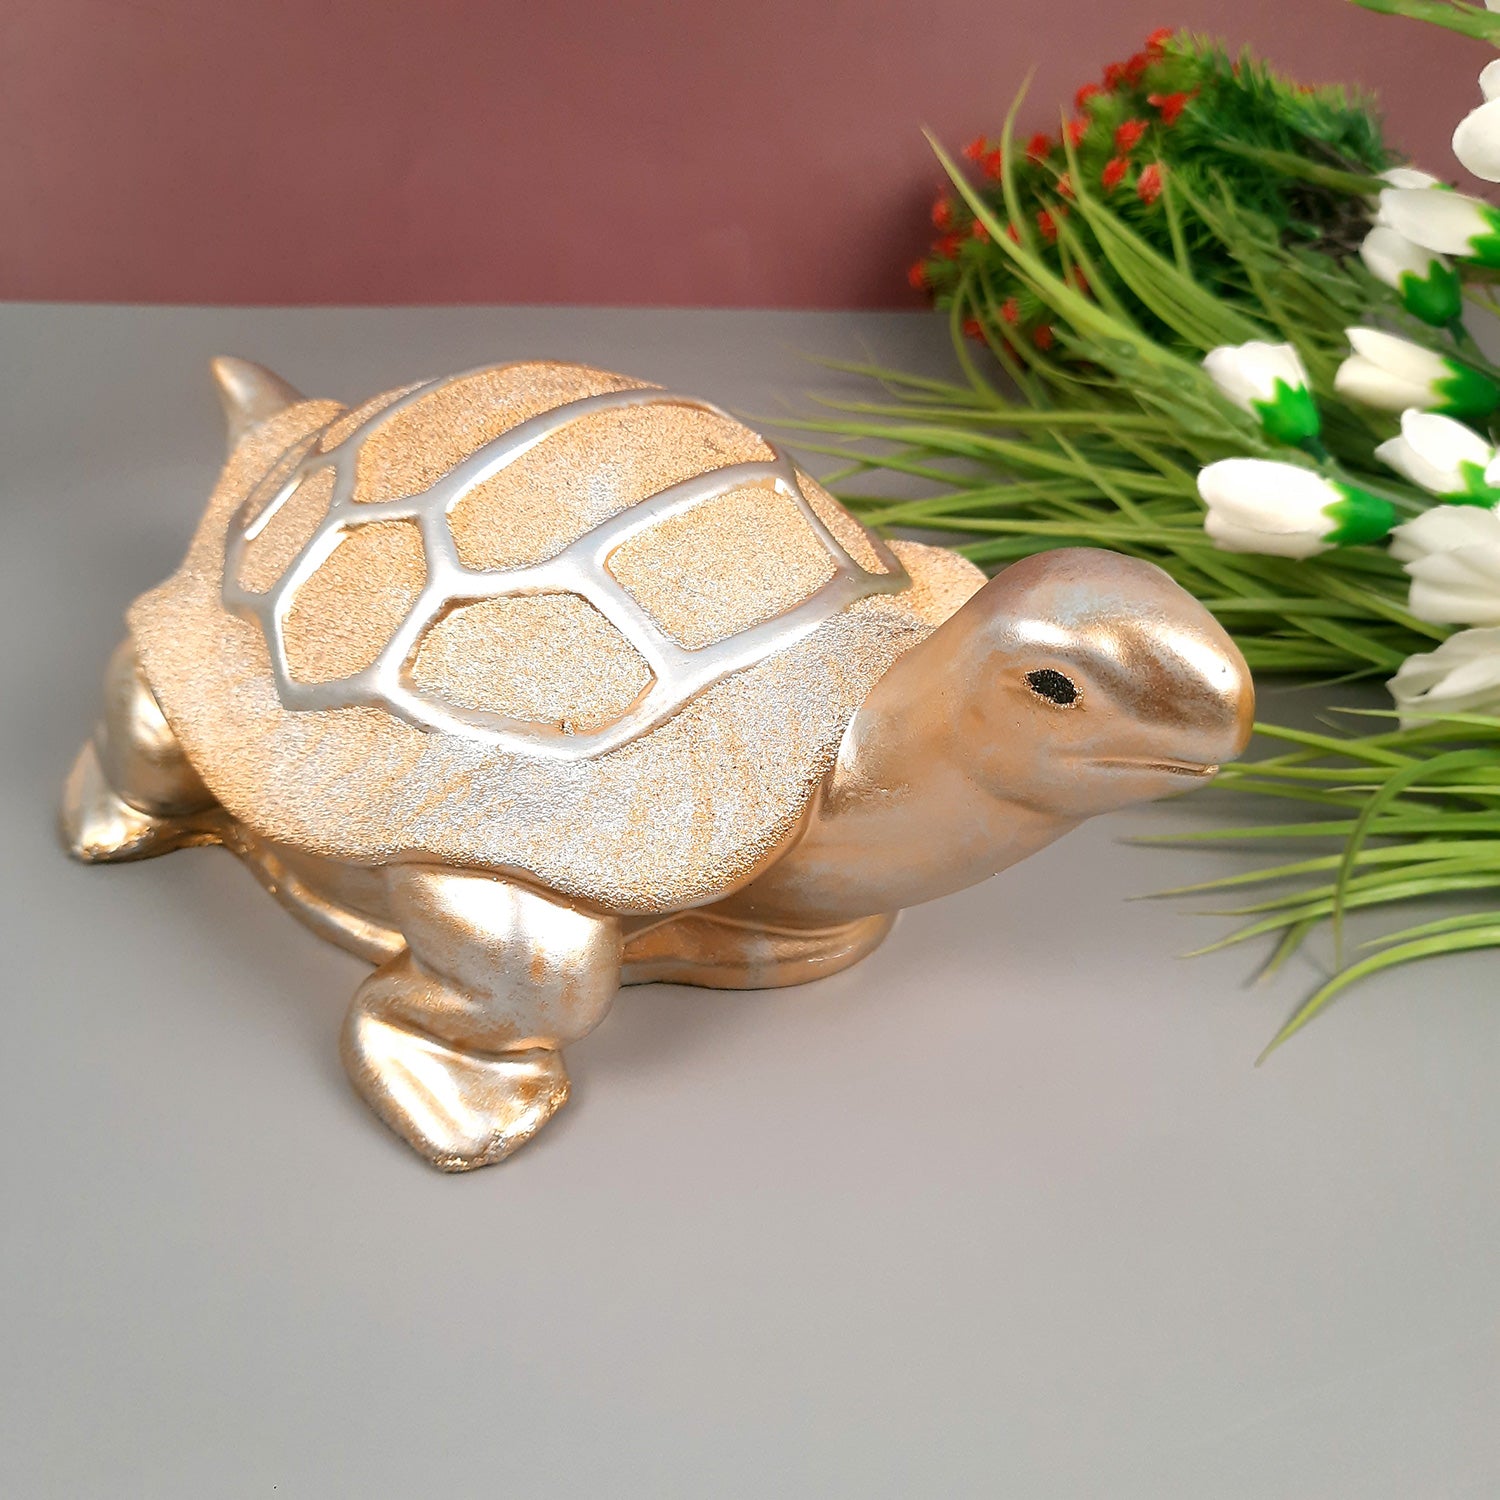 Feng Shui Tortoise Showpiece Set for Good Luck | Turtle Figurines for Good Luck & Positive Energy - For Home Decor, Living Room, Office & Gift Success - Apkamart #Style_Style 1